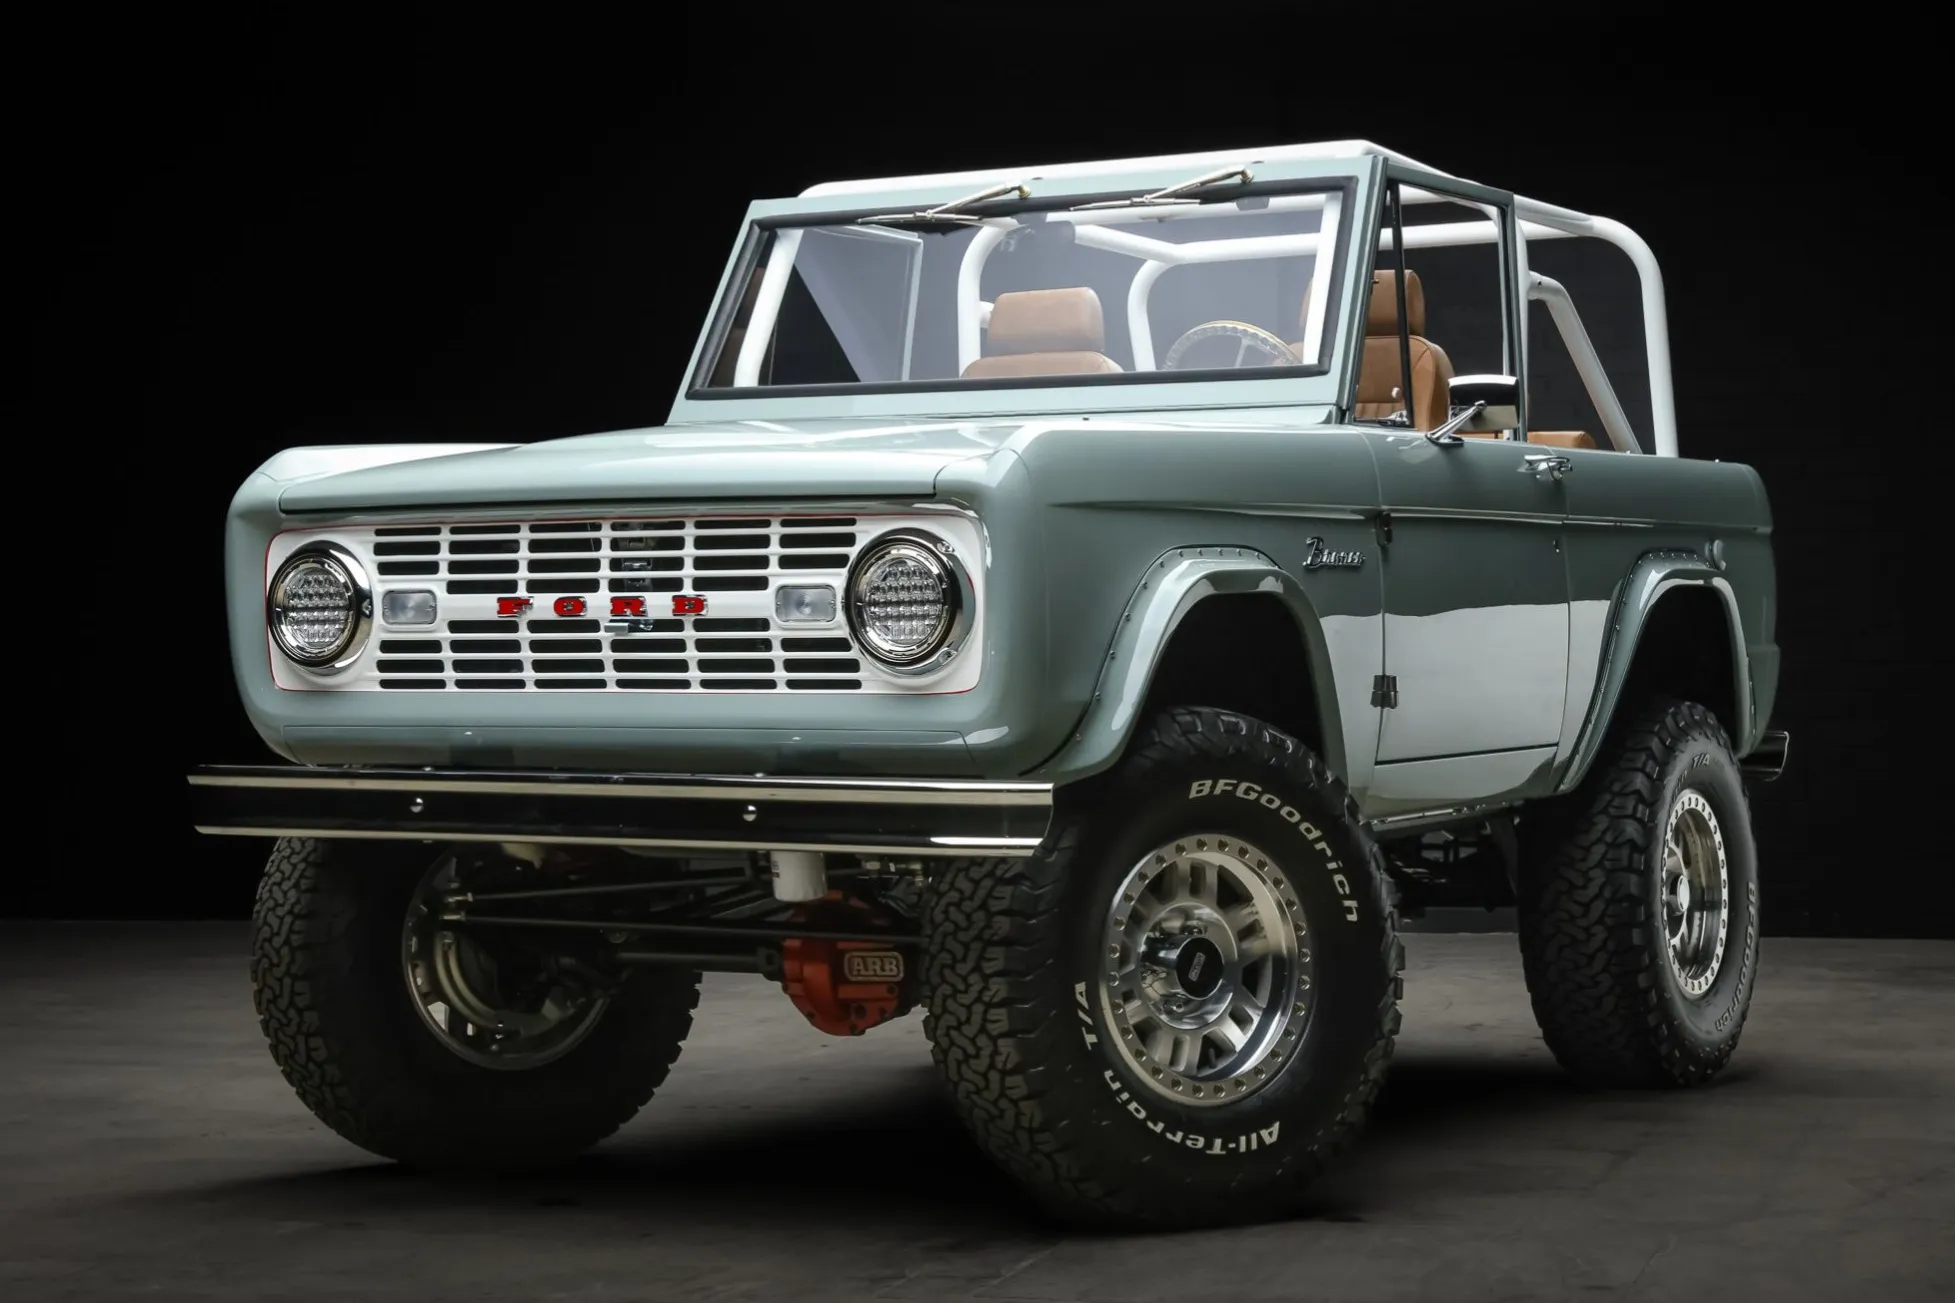 Coyote-Powered 1974 Ford Bronco | The Coolector